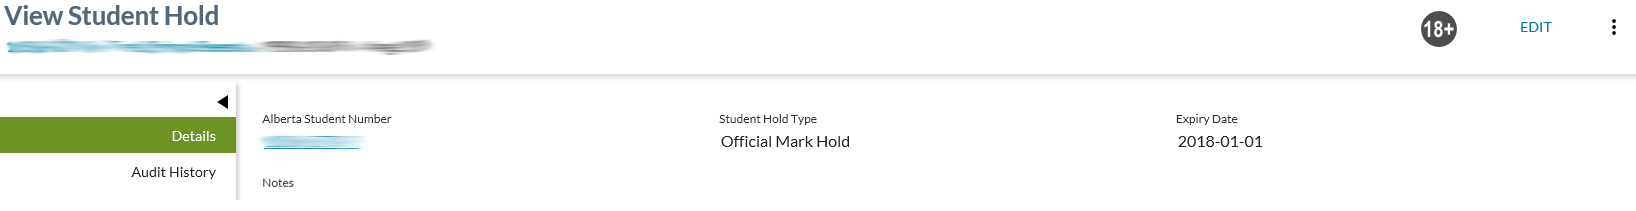 view_student_hold.png